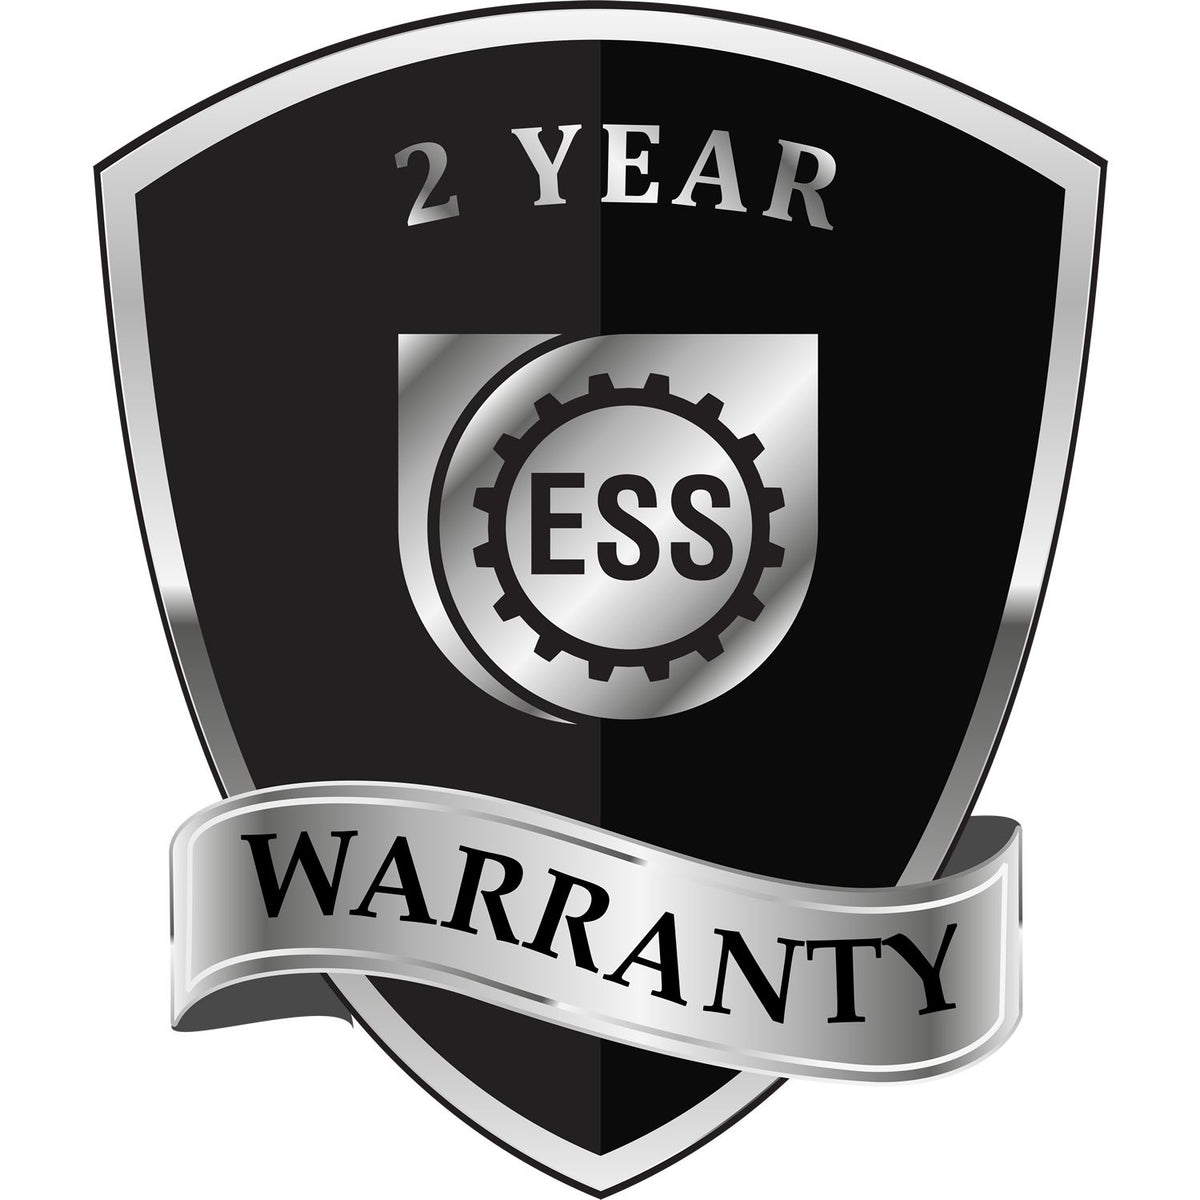 A black and silver badge or emblem showing warranty information for the Hybrid Michigan Geologist Seal